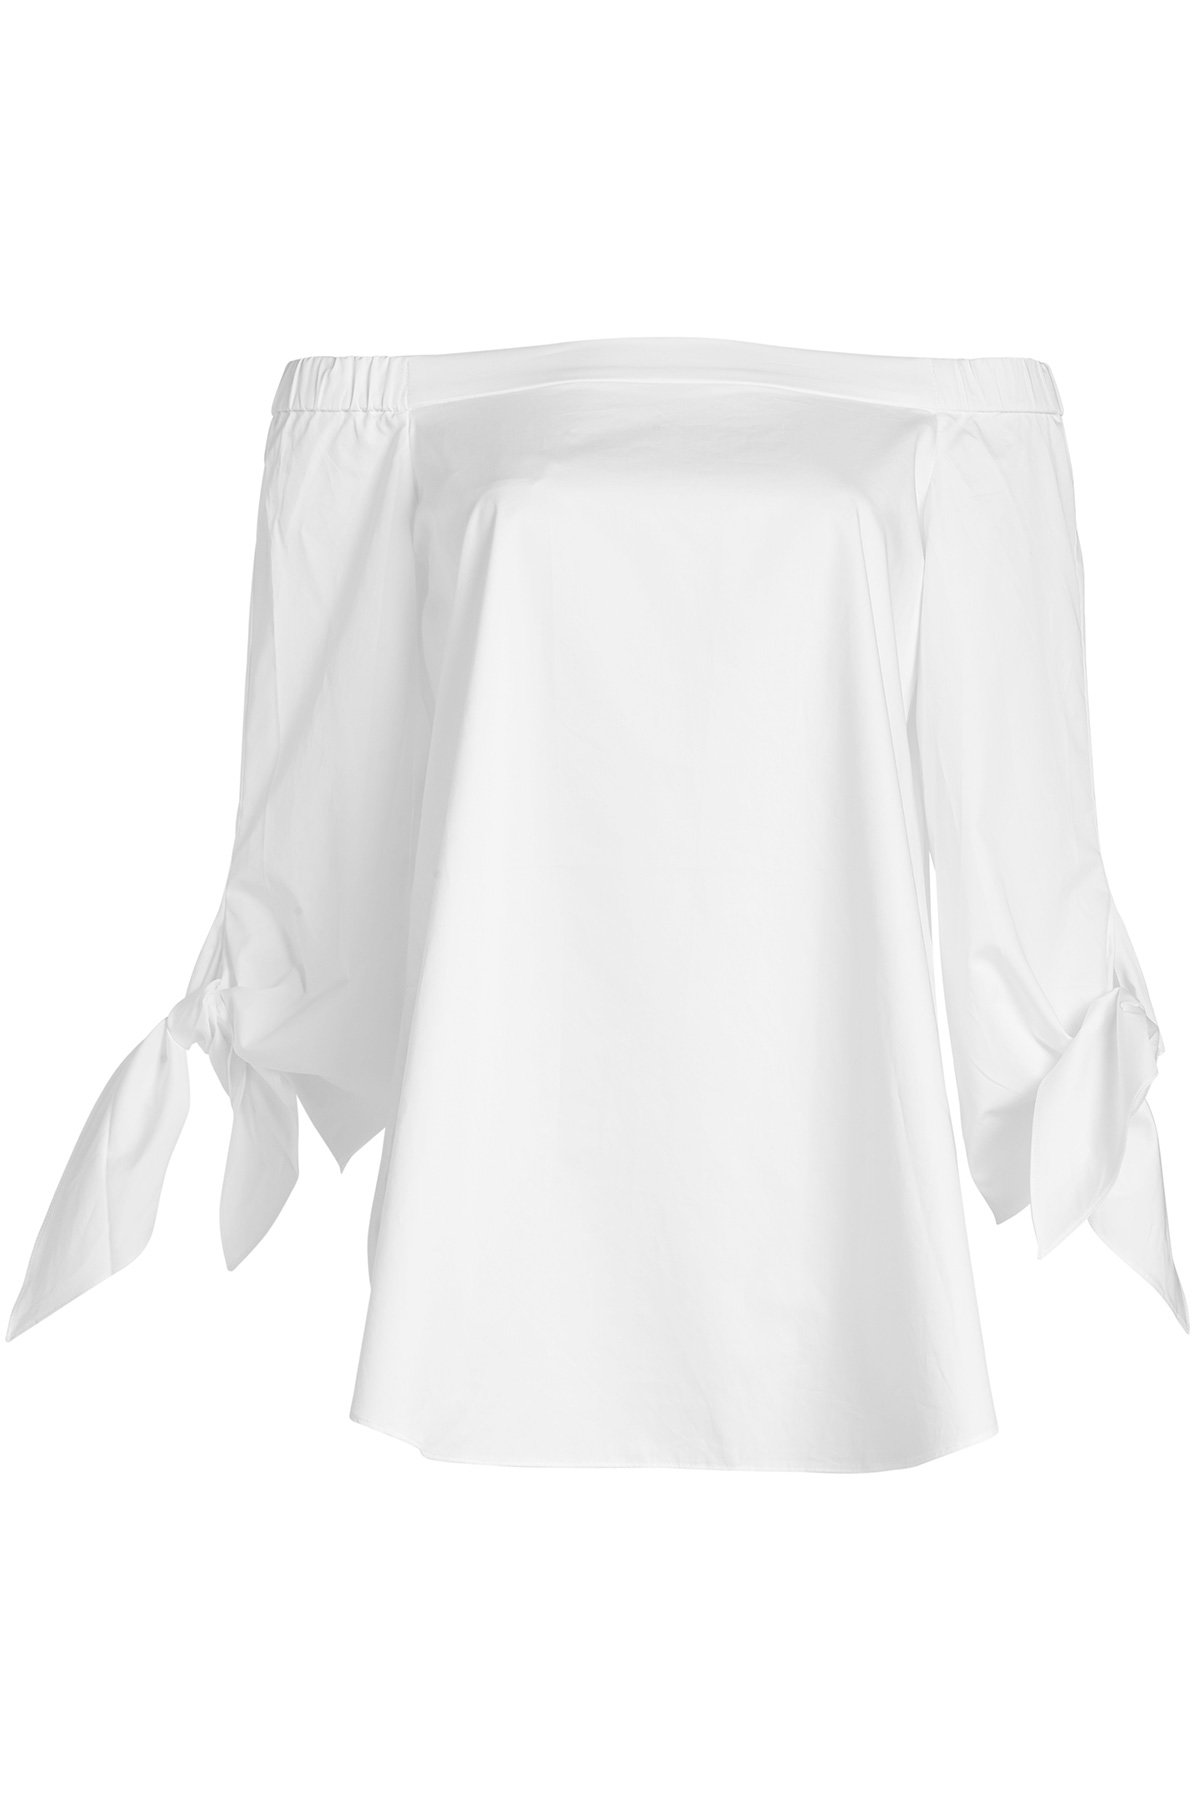 Tibi - Cotton Off-Shoulder Top with Bow Sleeves